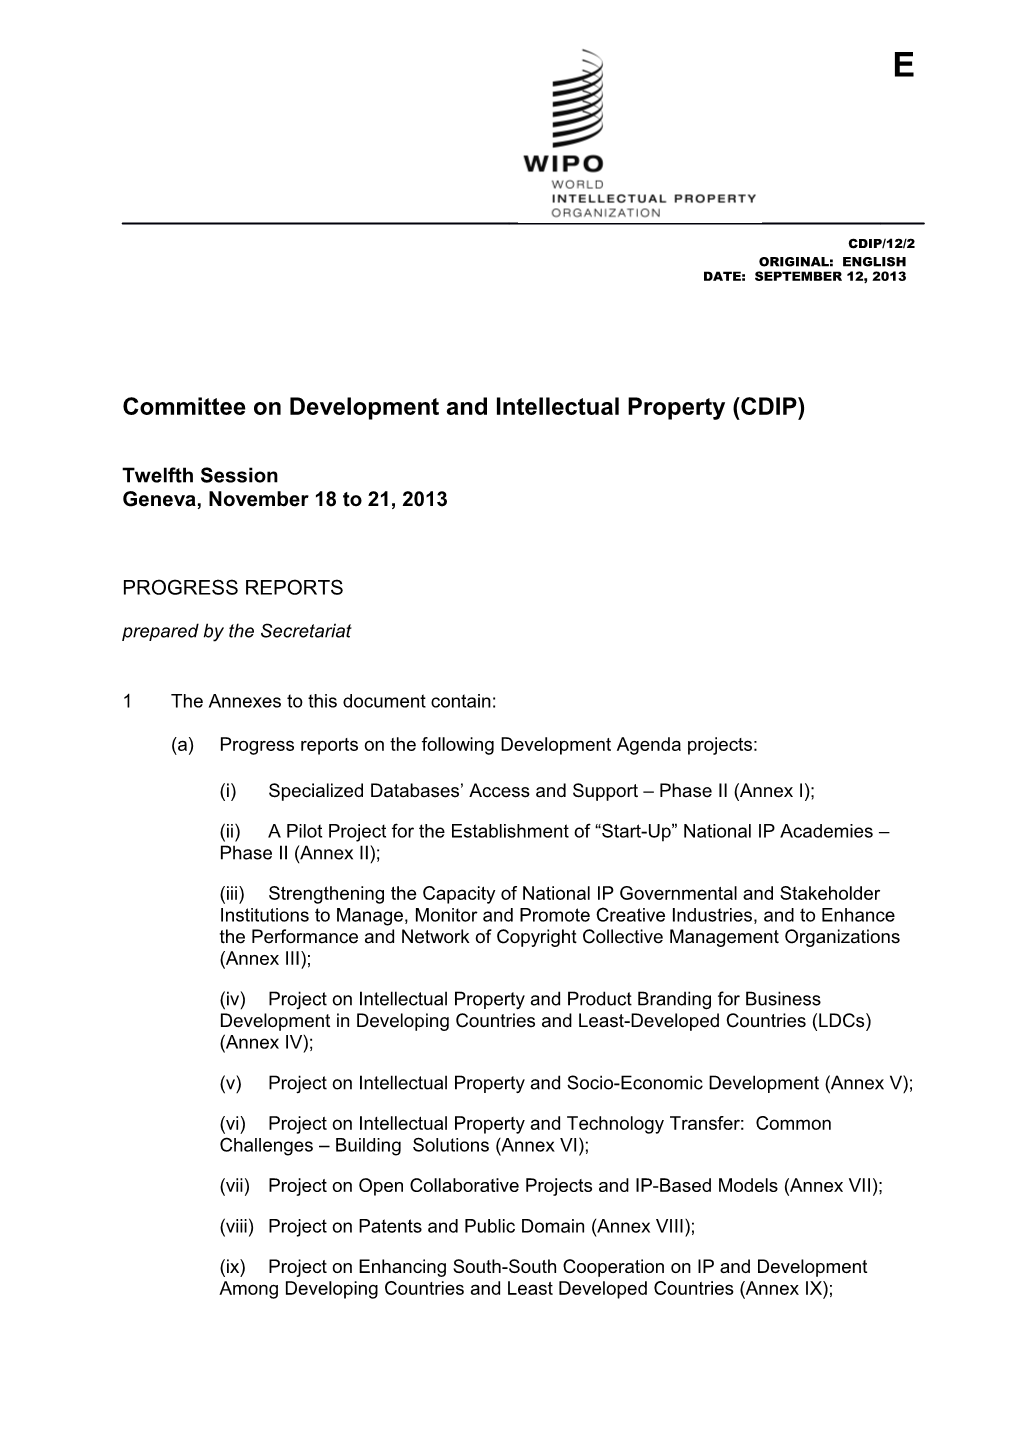 Committee on Development and Intellectual Property (CDIP) s6